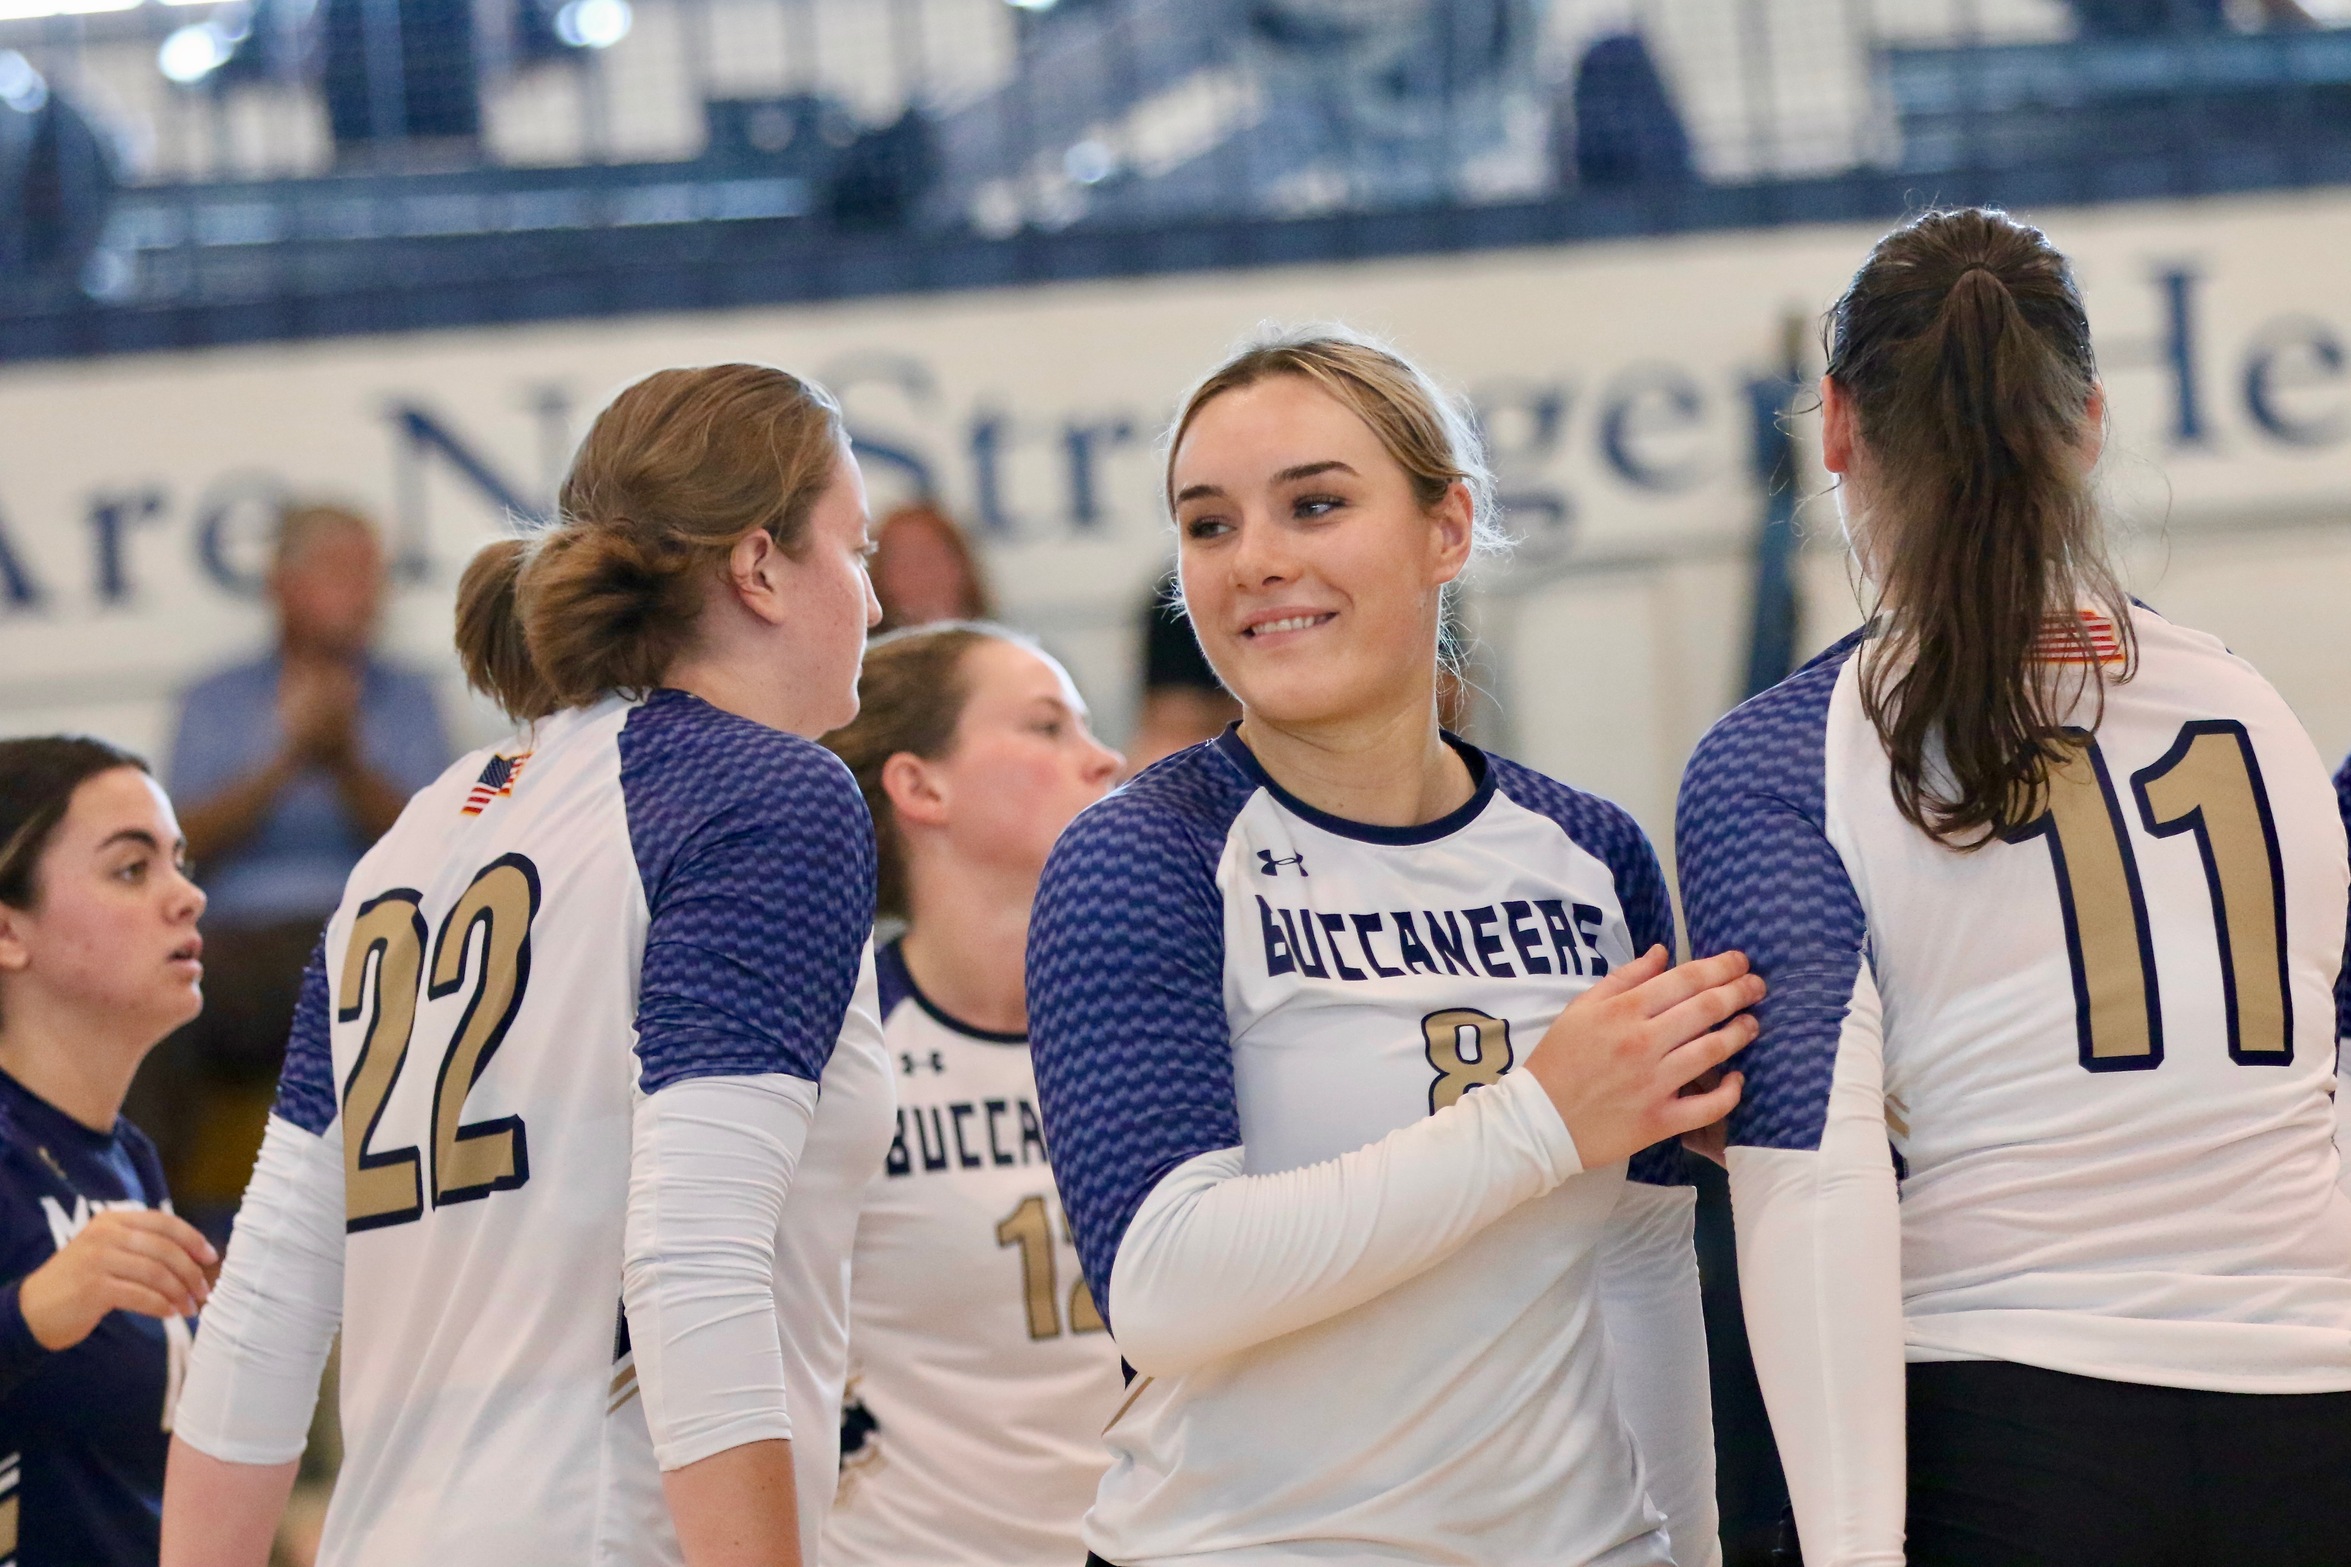 Bucs Drop Conference Match to Lancers in Straight Sets